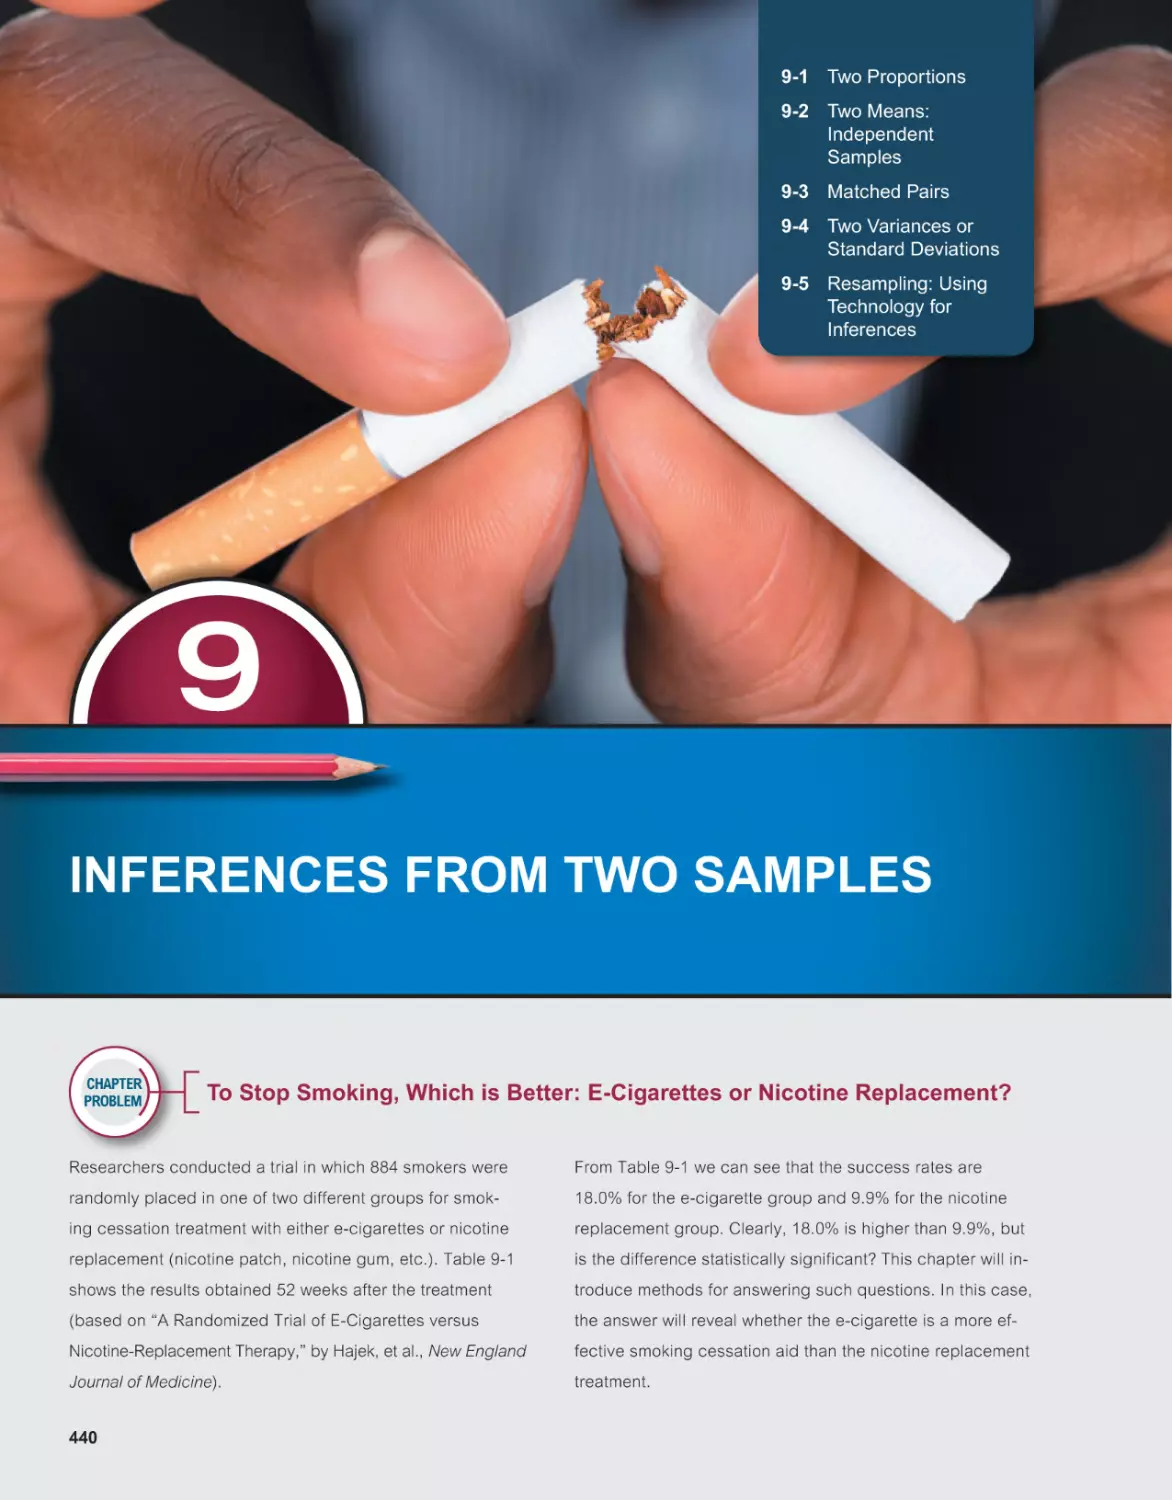 9 INFERENCES FROM TWO SAMPLES